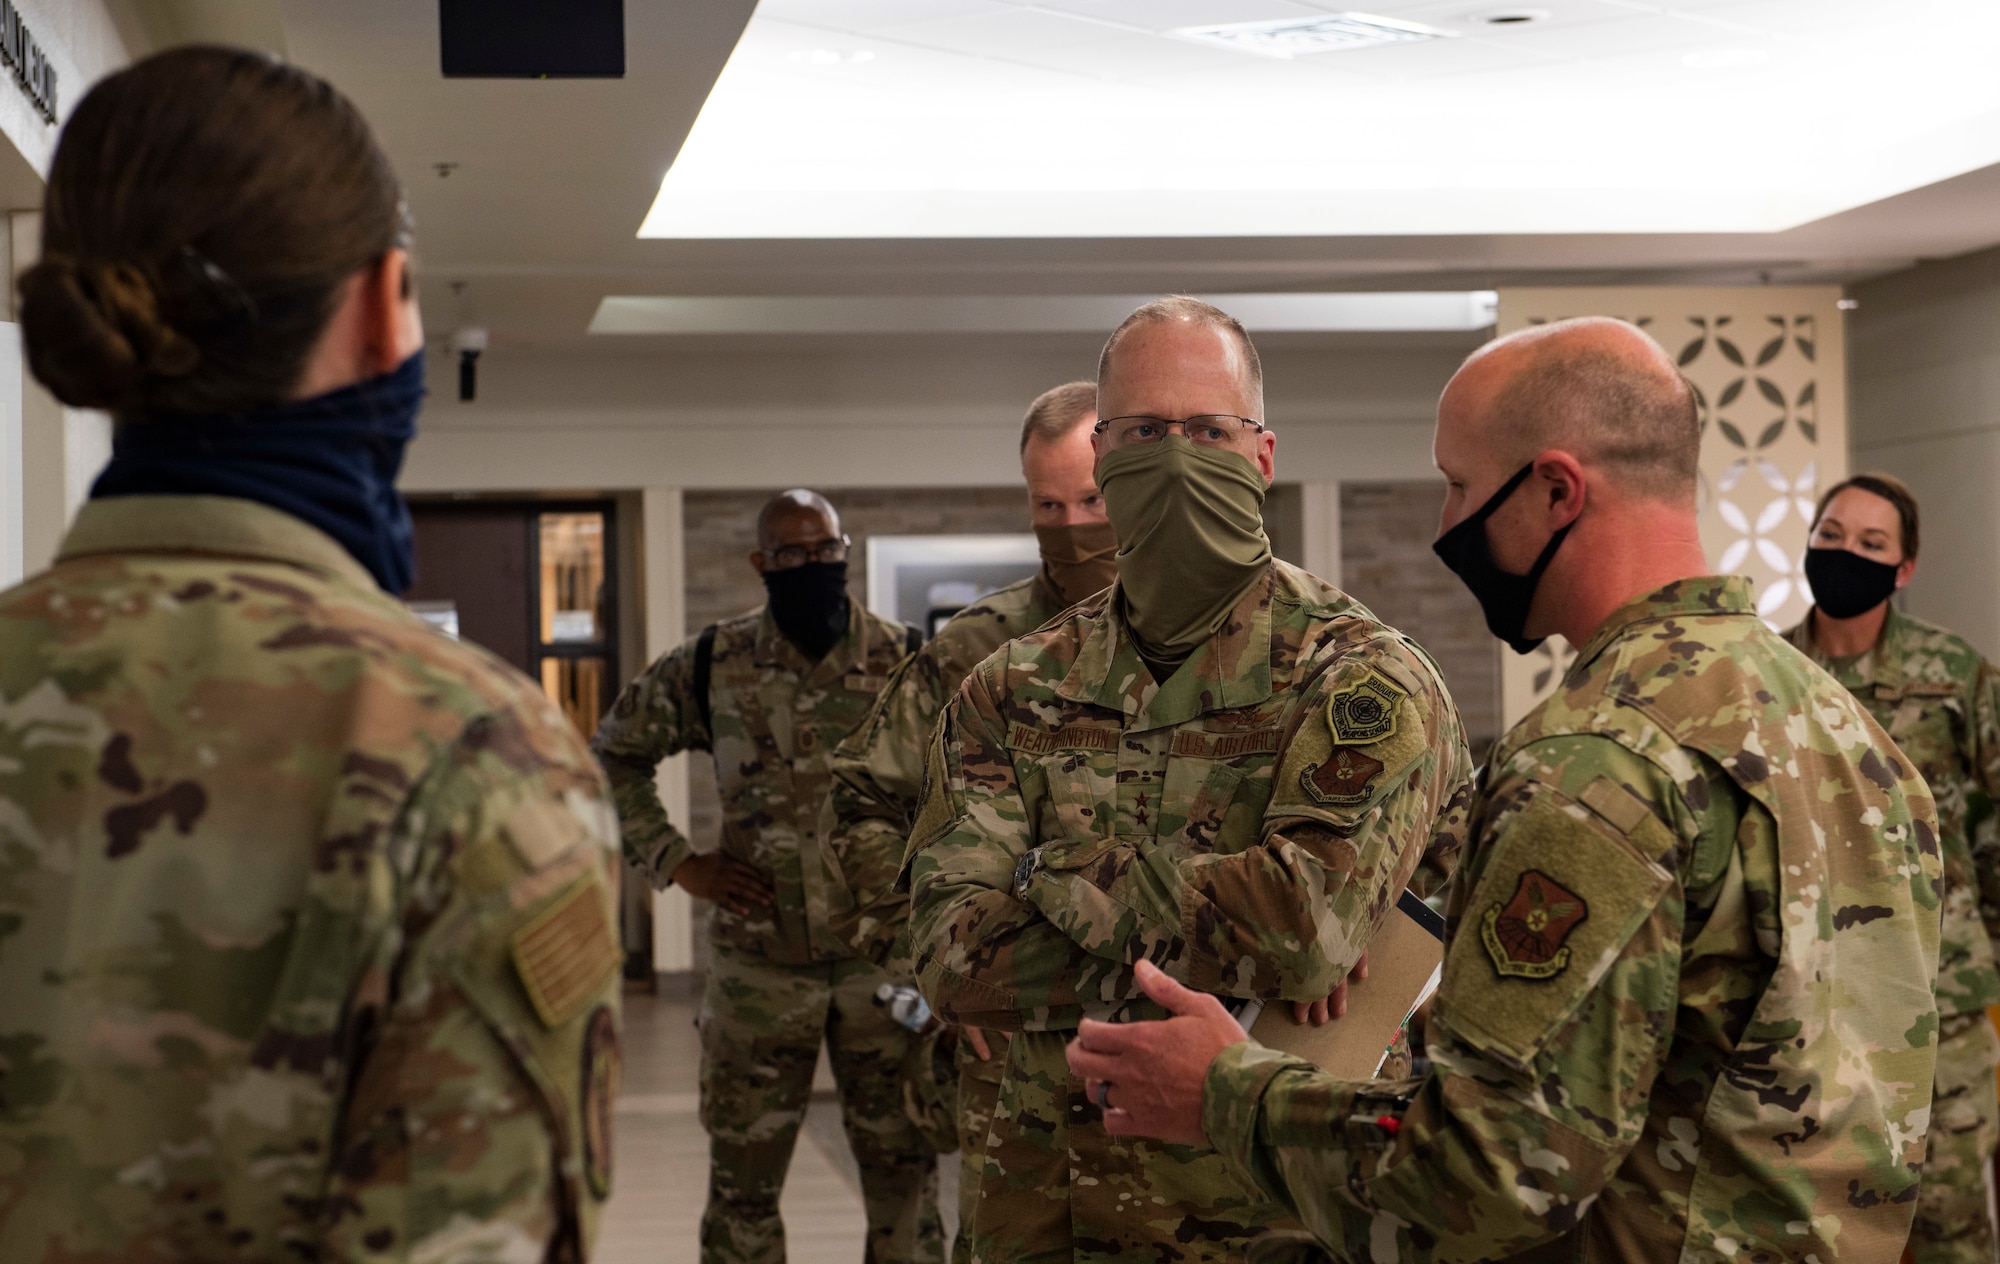 Master Sgt. Eric Roberts, 7th Medical Support Squadron superintendent, right, briefs Maj. Gen. Mark Weatherington, 8th Air Force and Joint-Global Strike Operations Center commander, middle, at Dyess Air Force Base, Texas, Aug. 11, 2020.